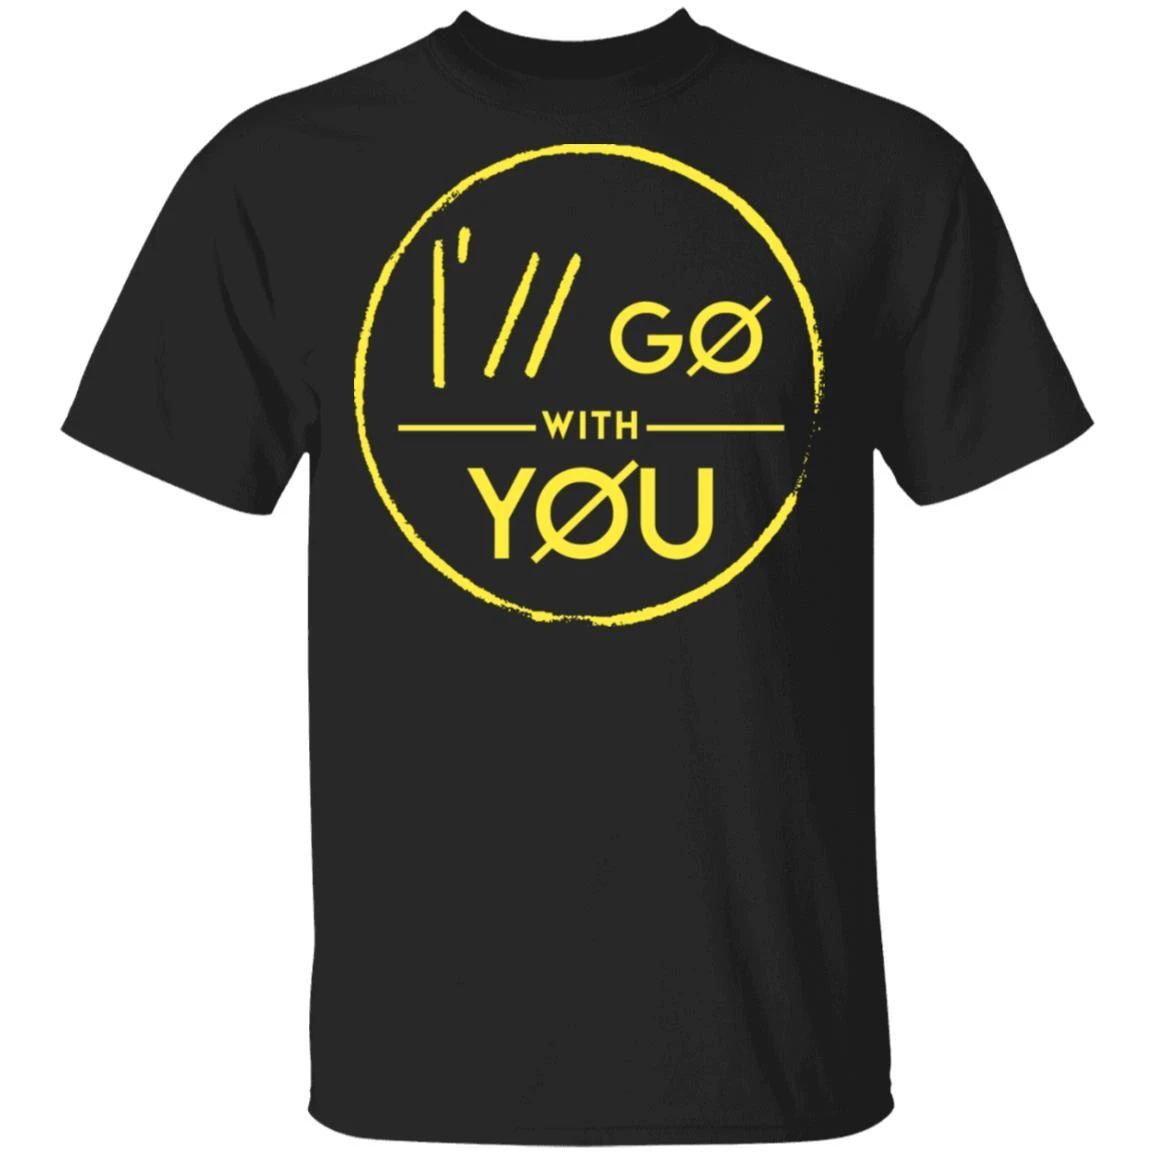 Twenty One Pilots Shirt I’ll Go With You T-shirt Cool Gift For Fans